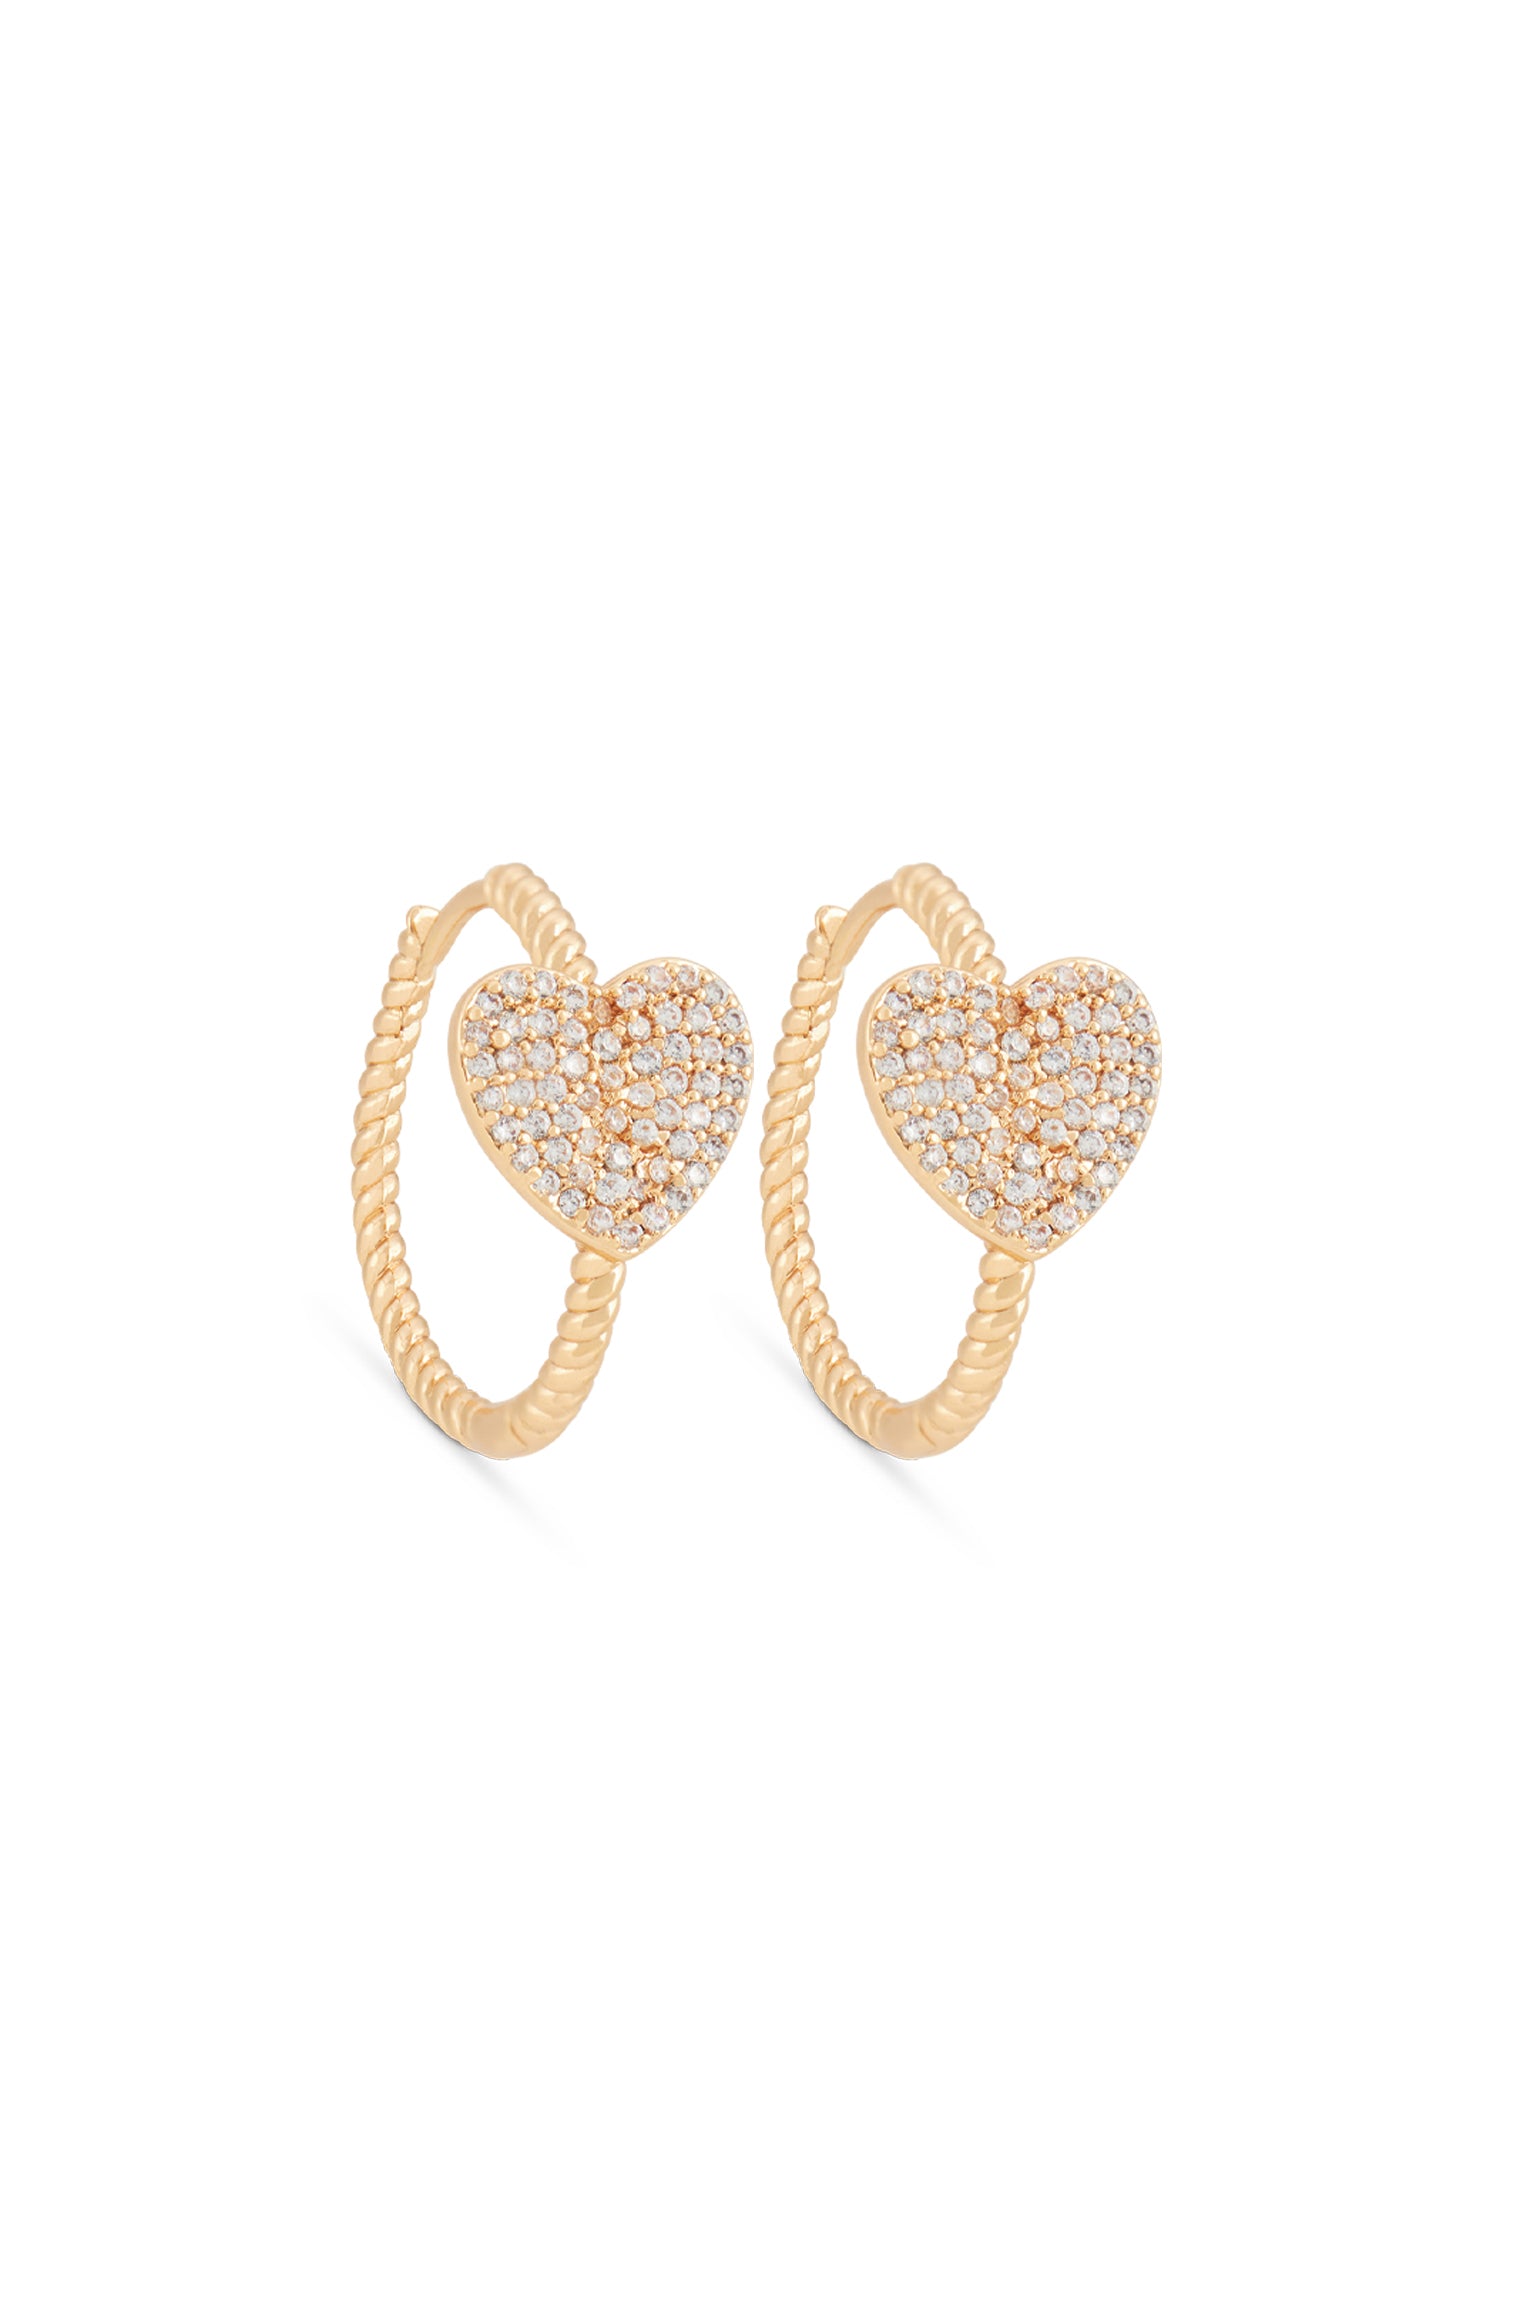 MELUSINA BIJOUX Circle Earrings with Gold Heart